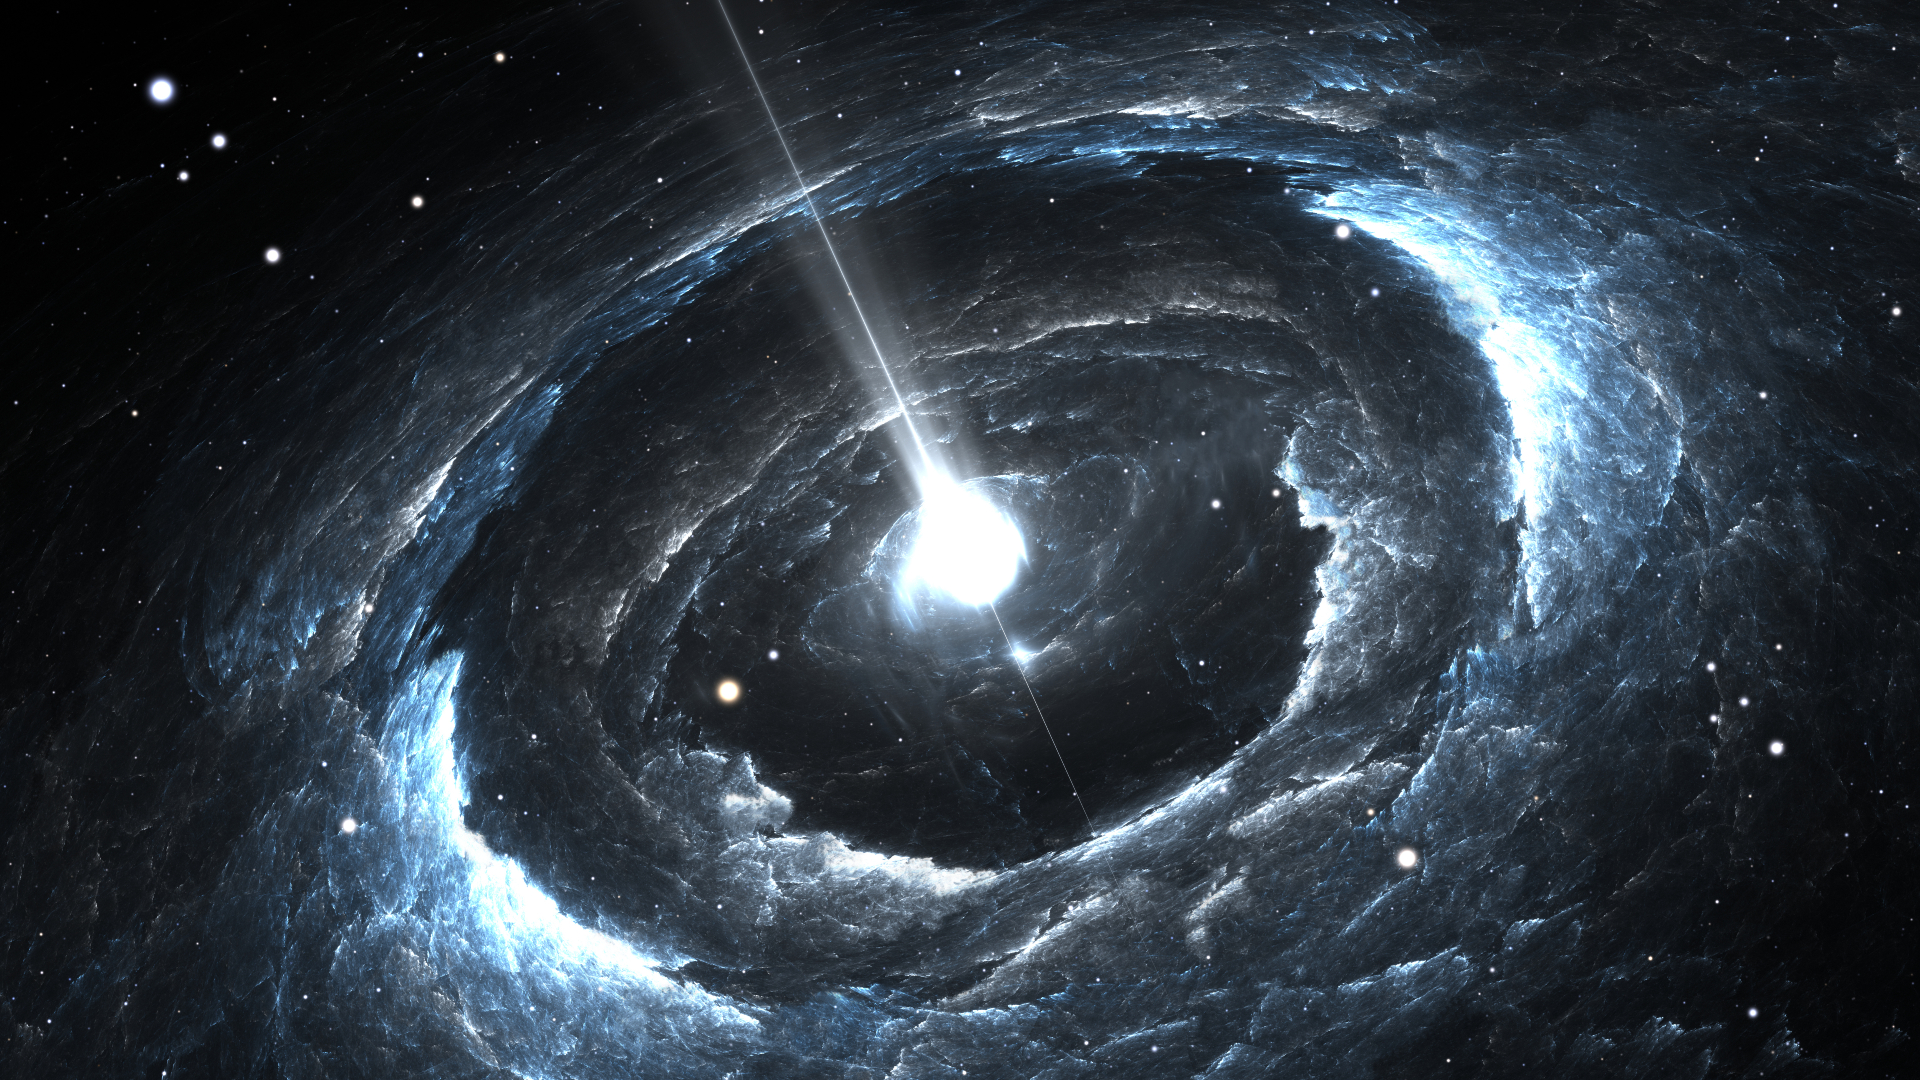 Graphic illustration of a highly magnetized rotating neutron star, with a bright white center.